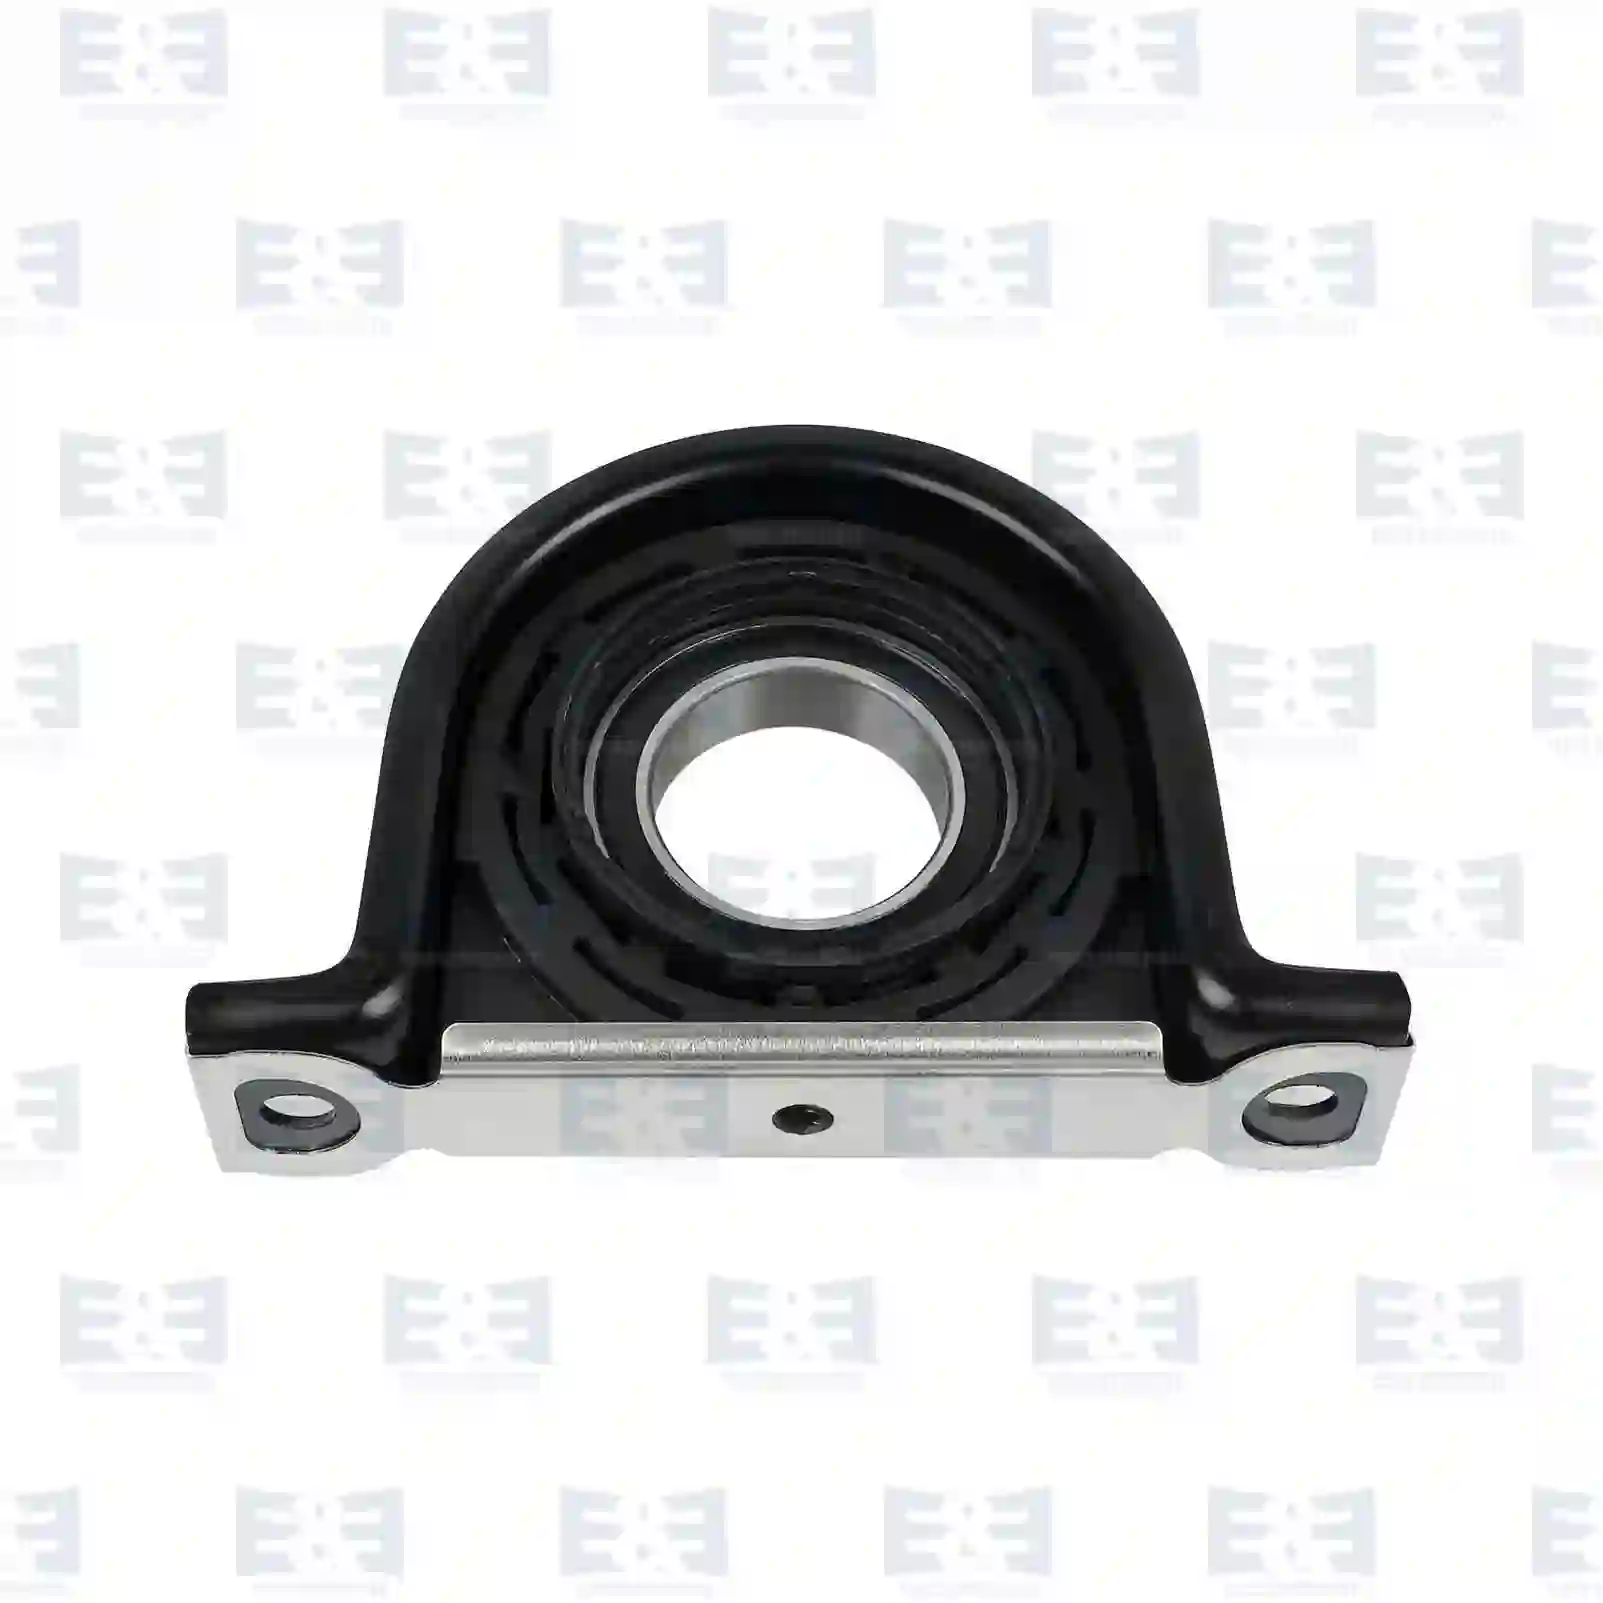 Support Bearing Center bearing, EE No 2E2276893 ,  oem no:7420876194, 20876194, ZG02477-0008 E&E Truck Spare Parts | Truck Spare Parts, Auotomotive Spare Parts